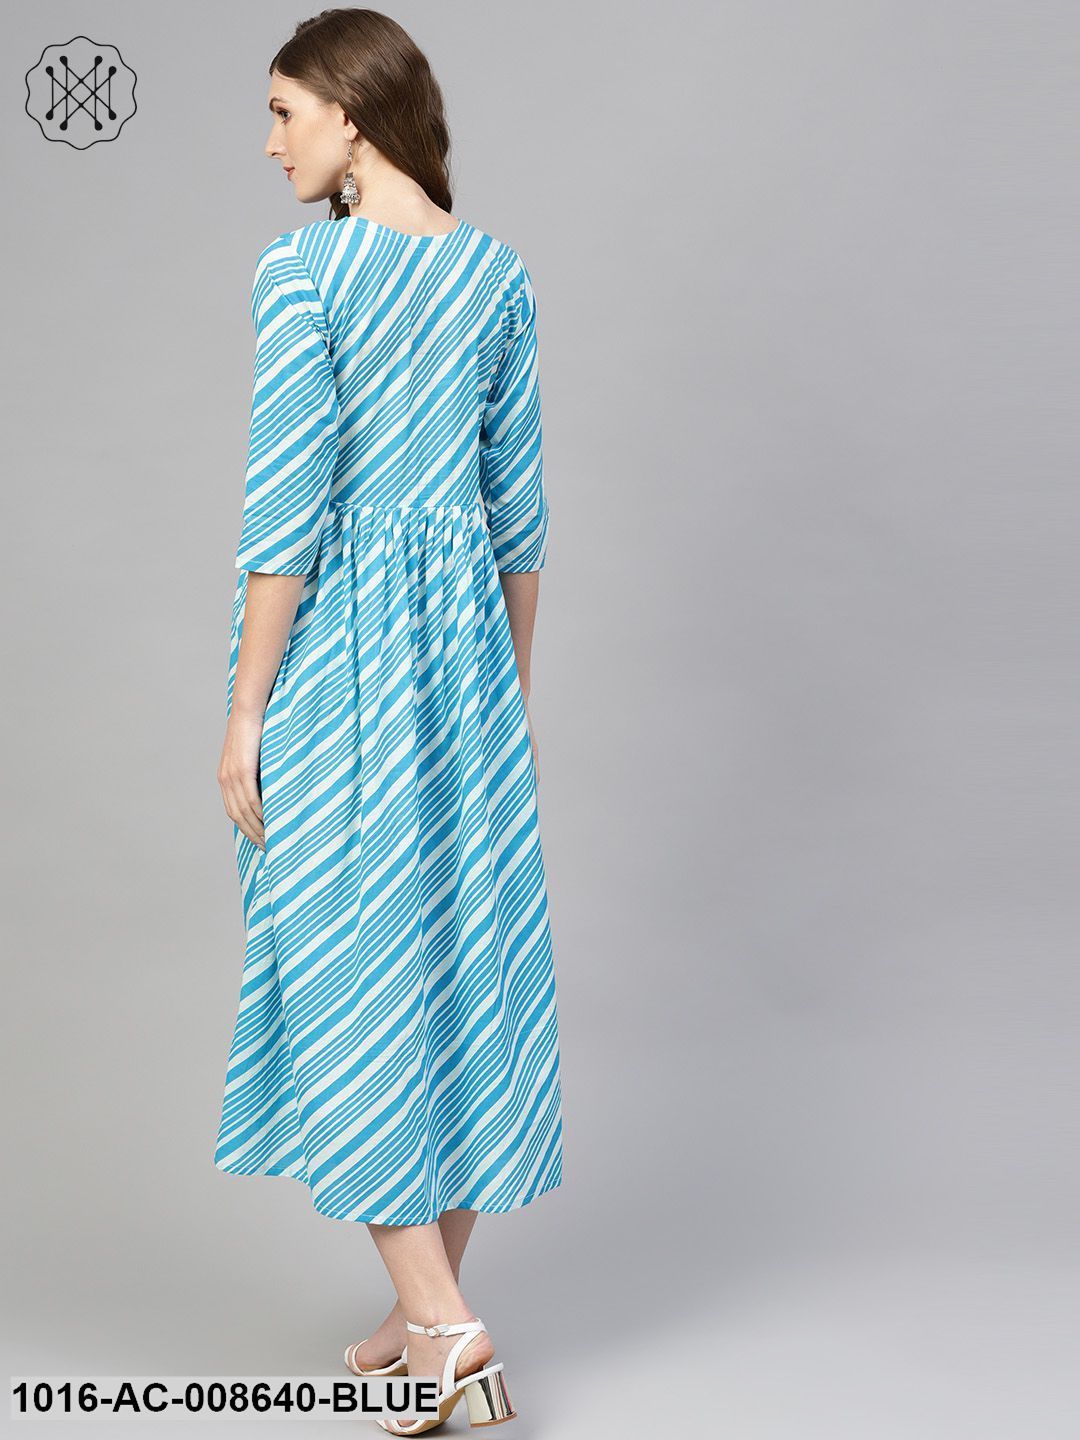 Blue & With Diagonal Striped Dress With Side Keyhole & 3/4 Sleeves